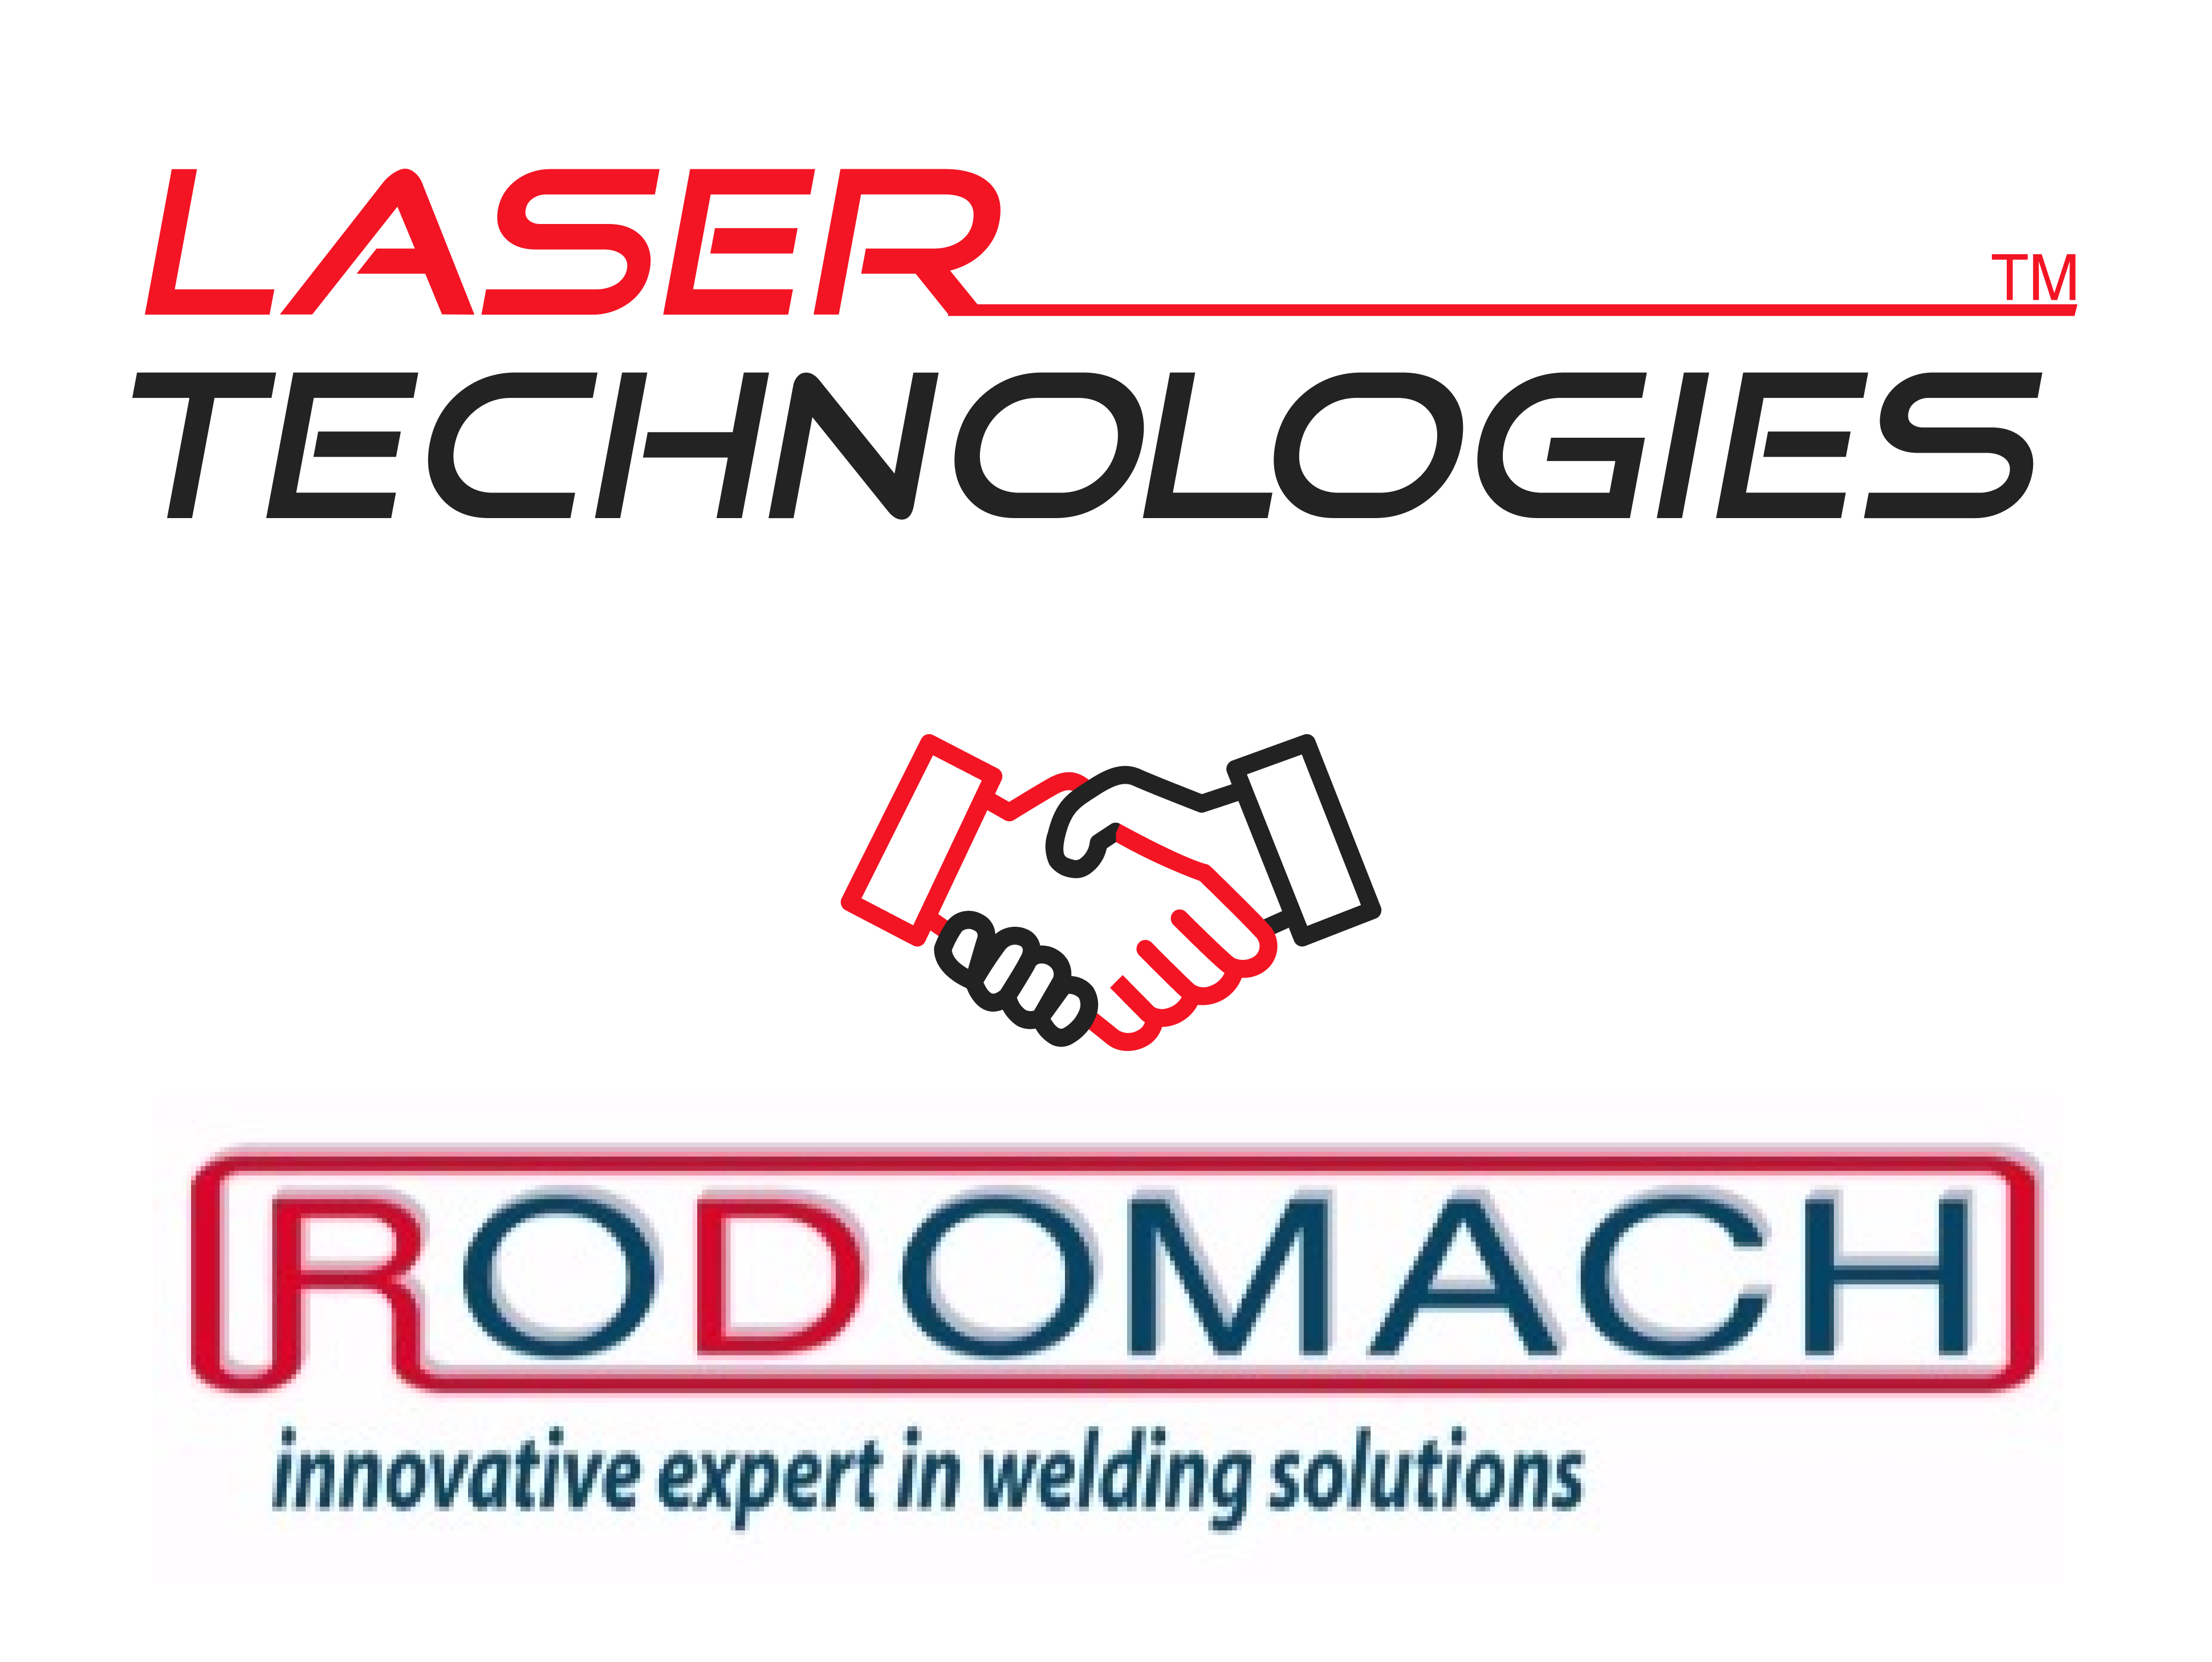 Laser Technologies partners with Rodomach